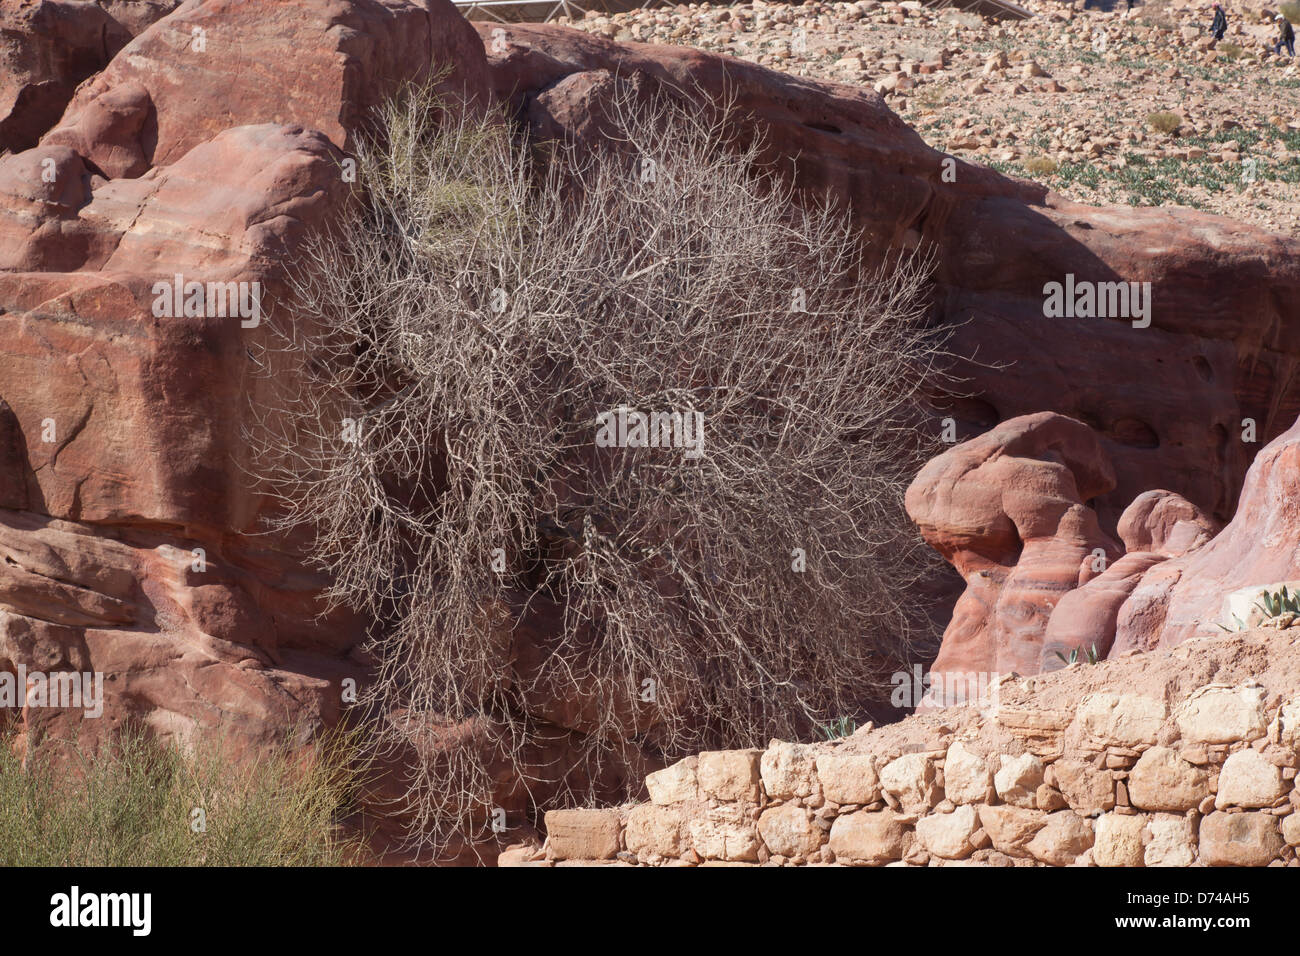 Abstract natural red stone and bush, from Petra, Jordan, for background or where texture is needed Stock Photo